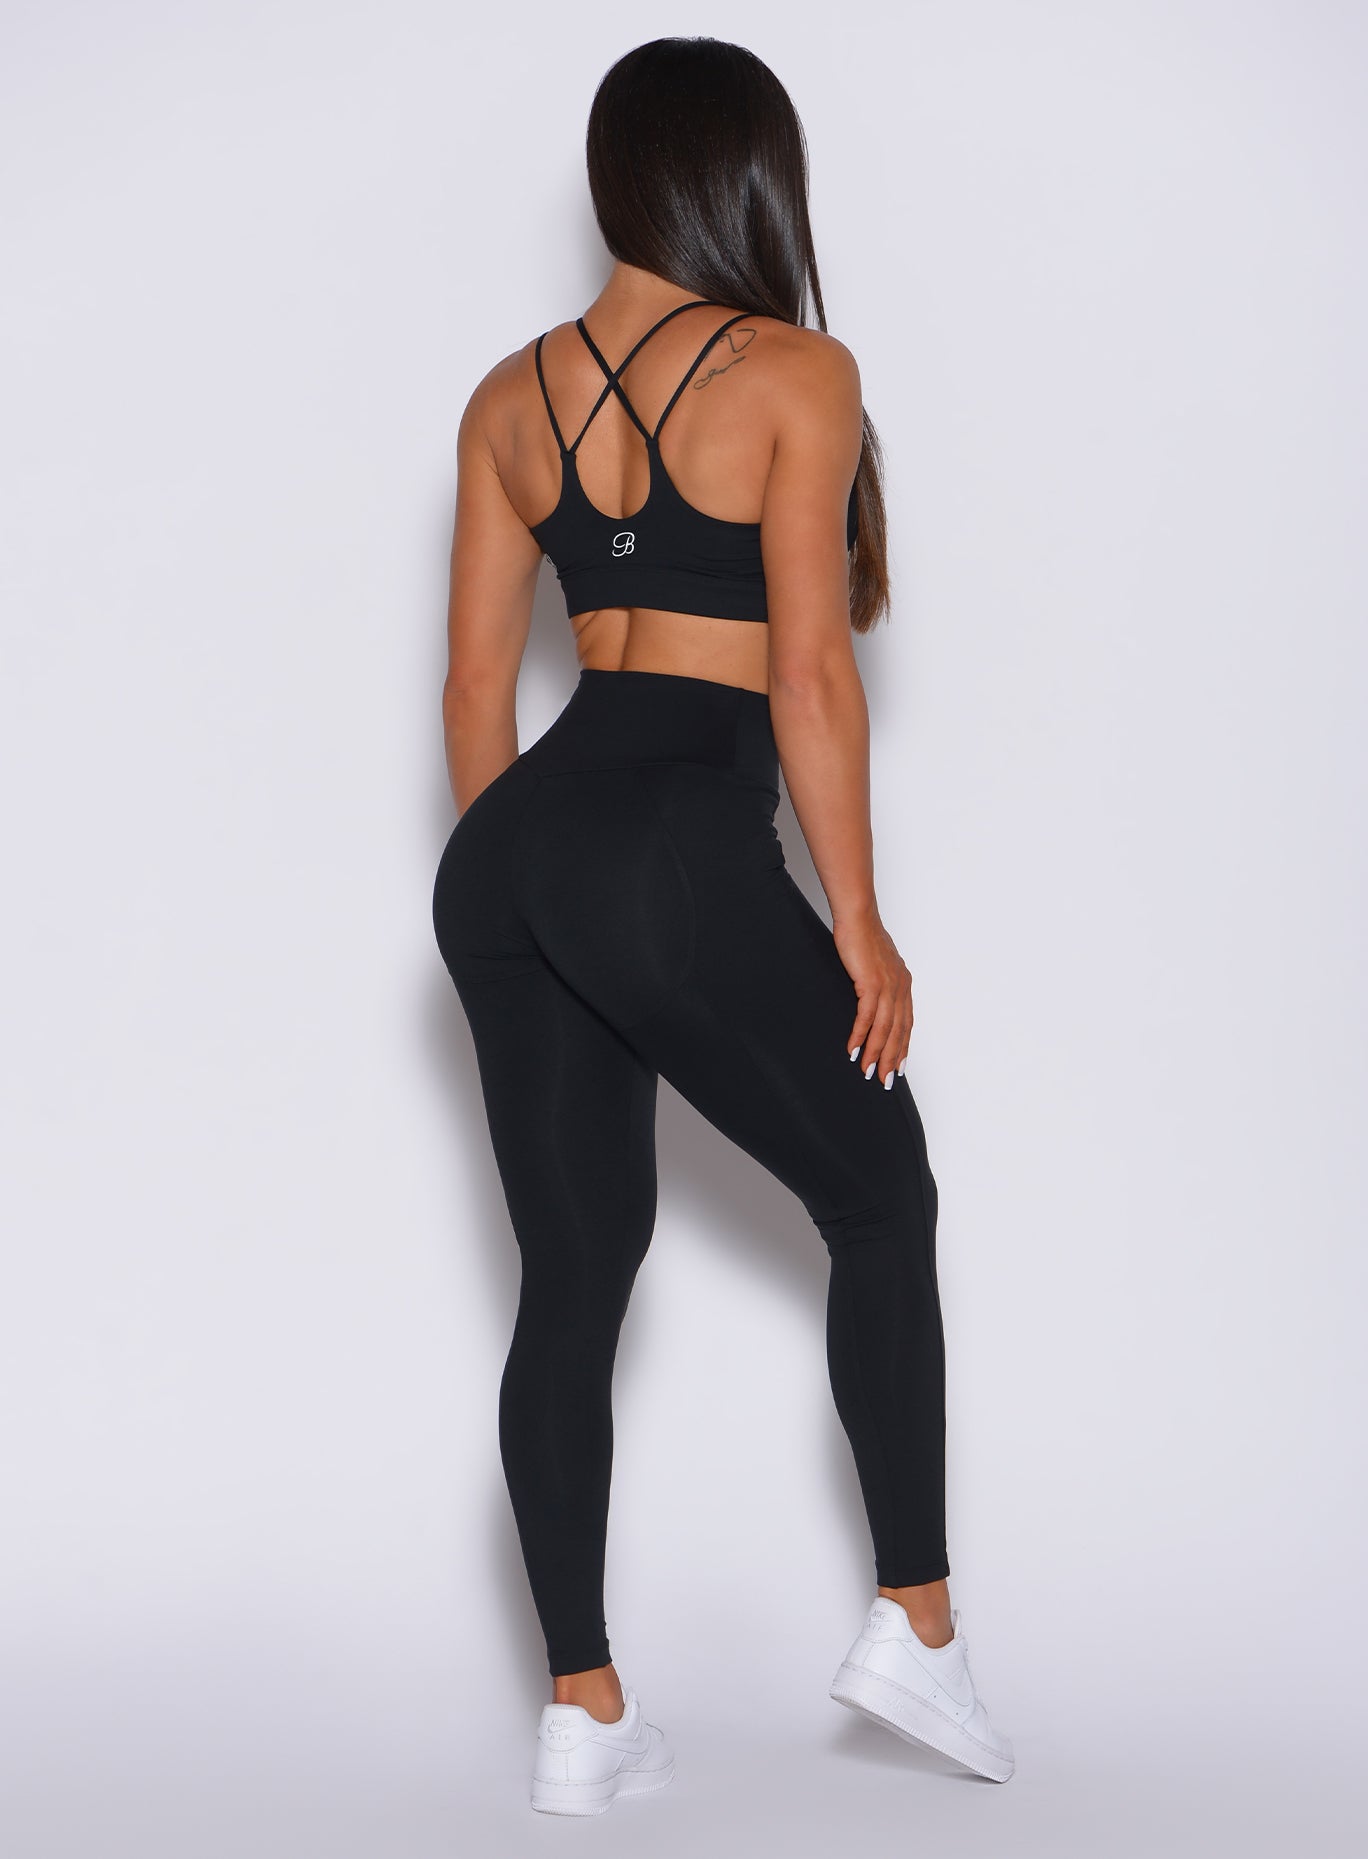 Back profile view of a model in our new and enhanced black shape leggings and a matching bra